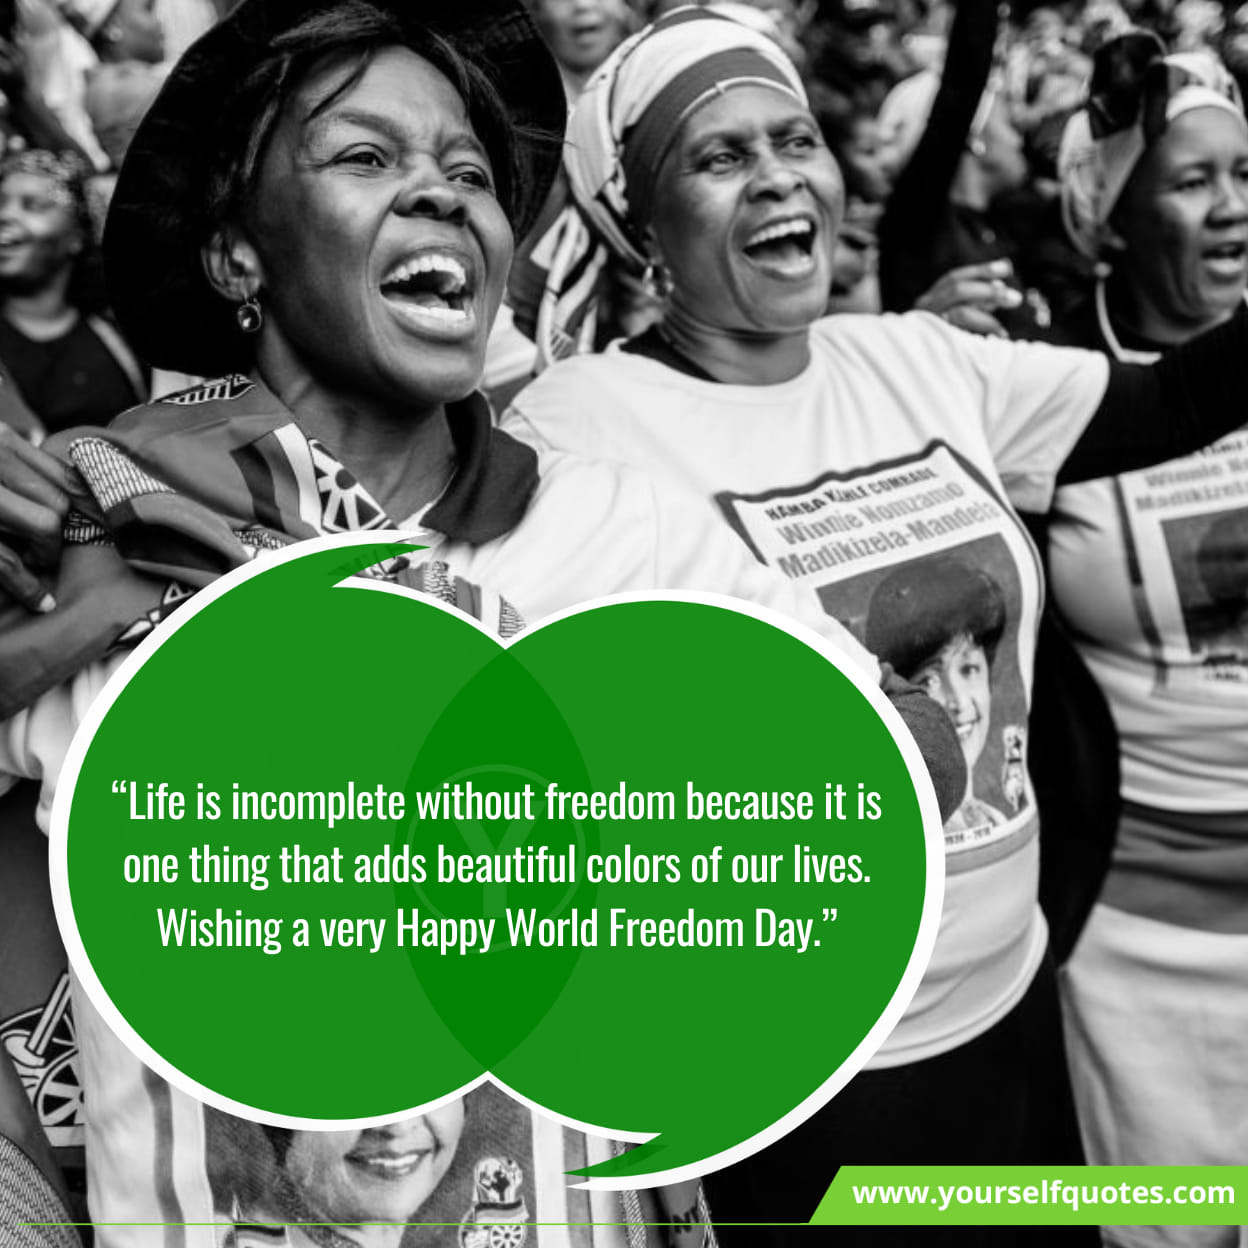 Inspiring Encouraging Quotes For Happy Freedom Day